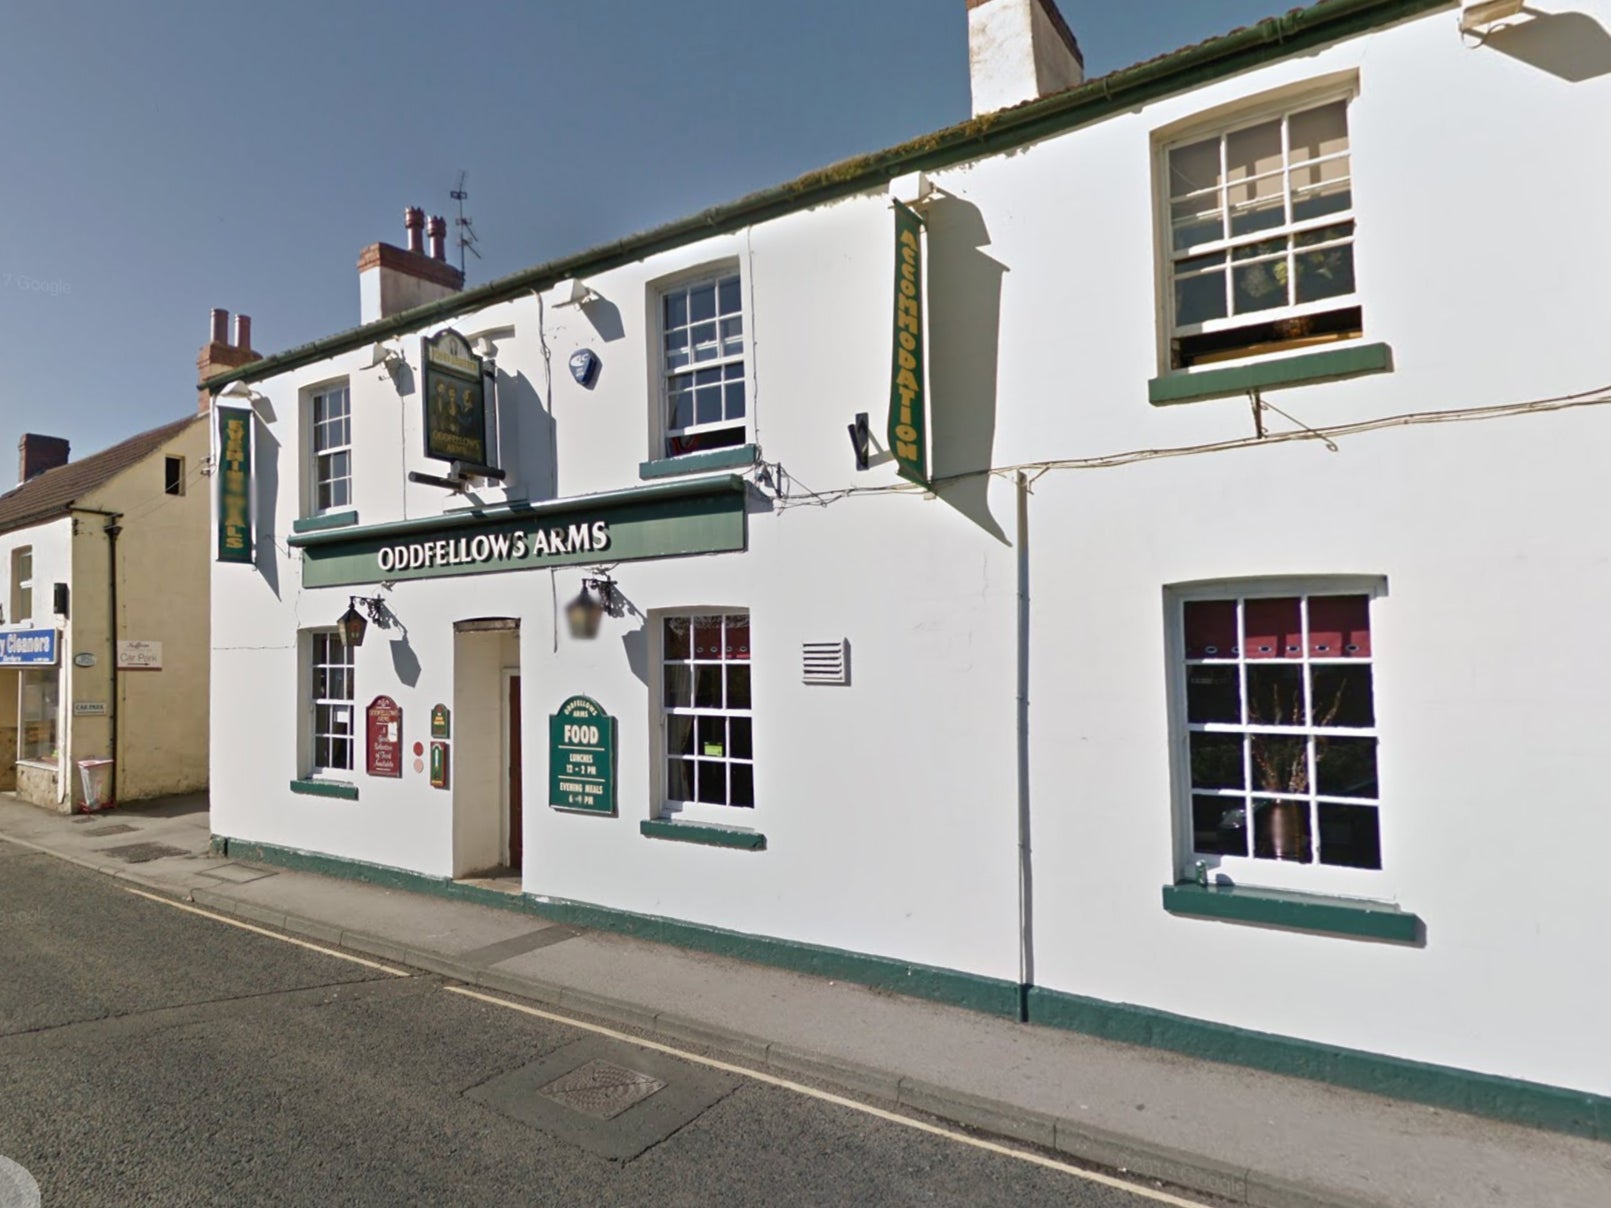 Owner Maggie Holmes said she had introduced the policy at the Oddfellows Arms after a number of young adults allegedly tested positive for the virus in the small village